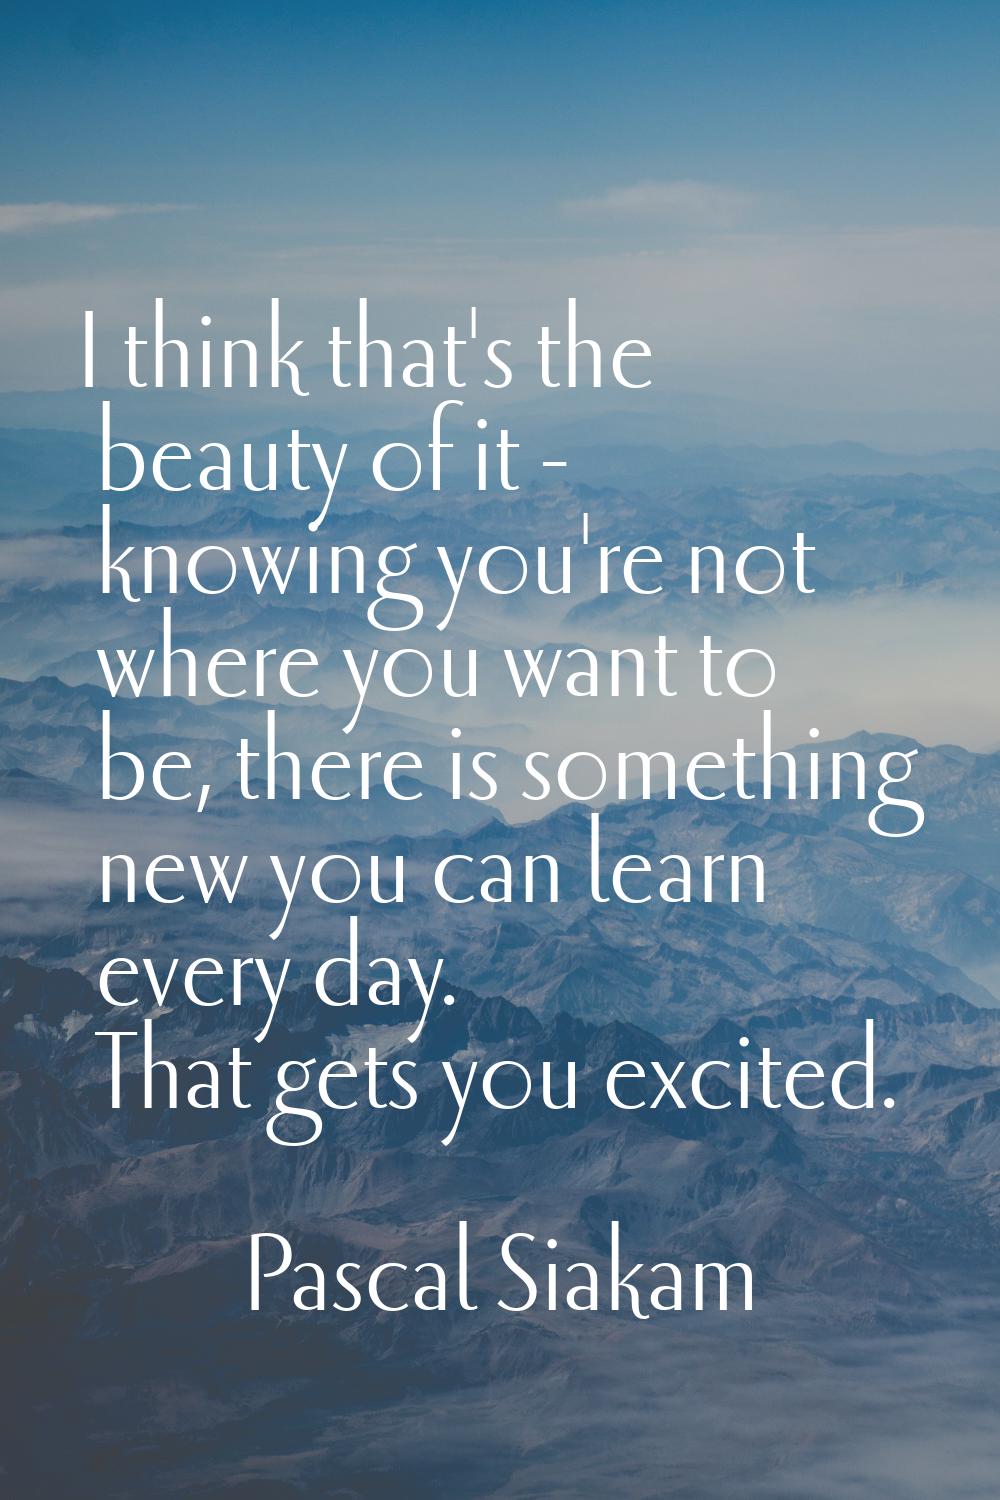 I think that's the beauty of it - knowing you're not where you want to be, there is something new y